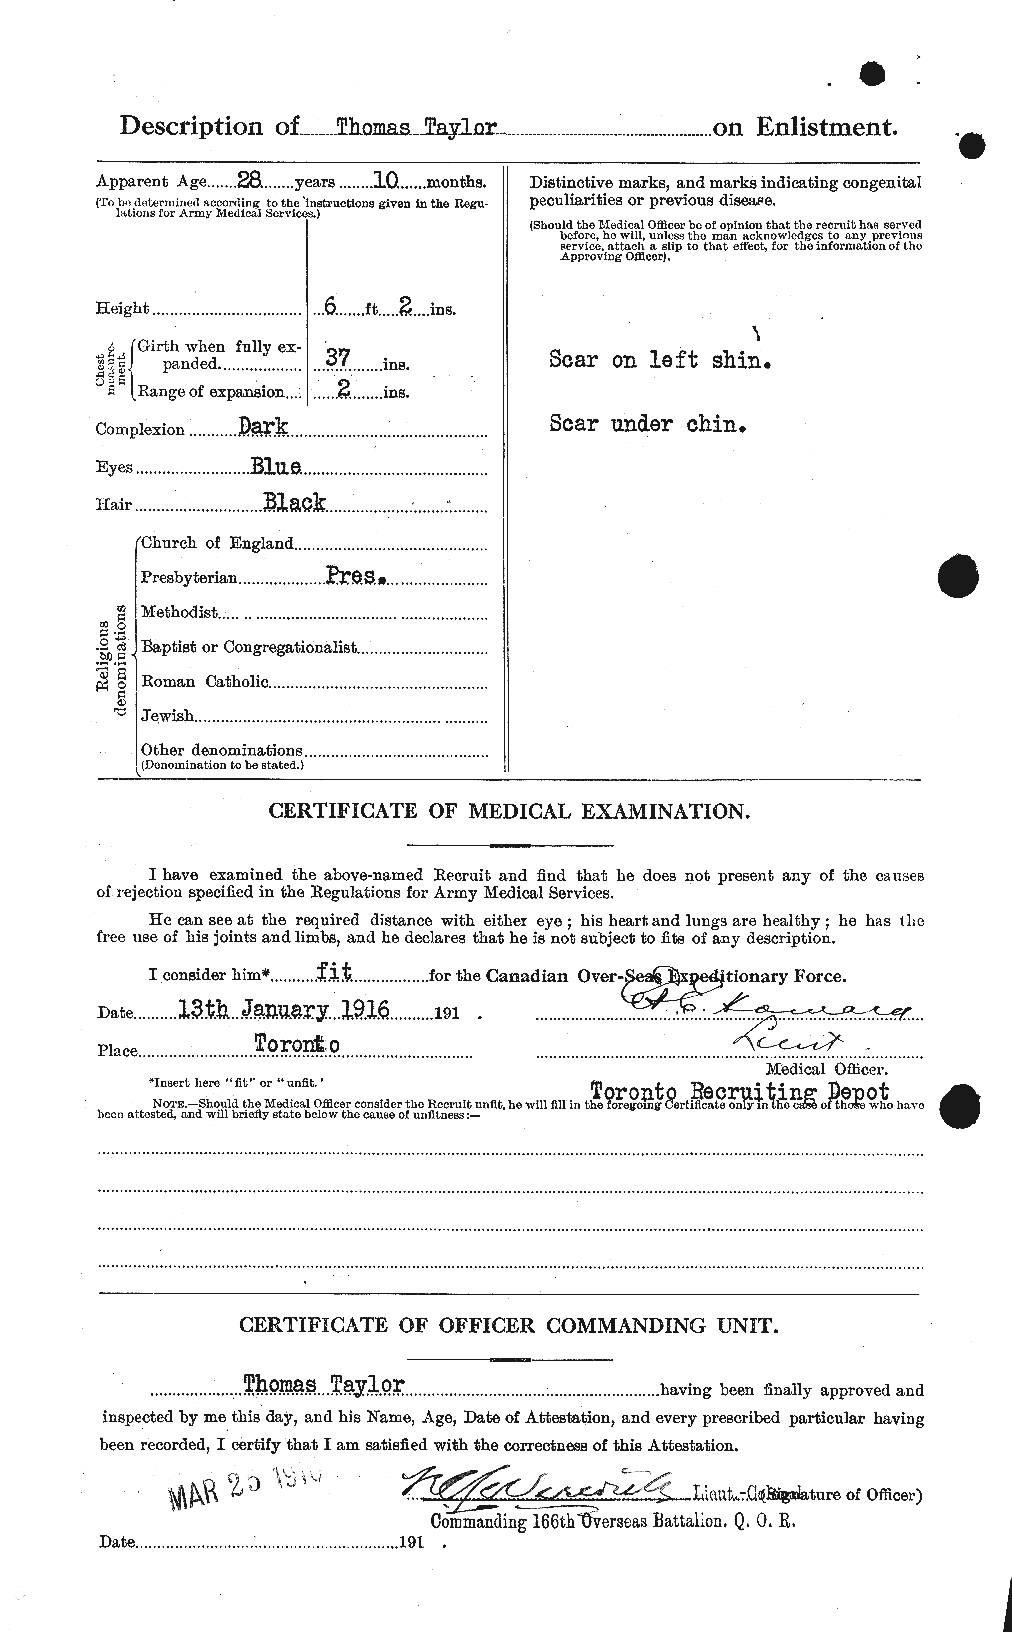 Personnel Records of the First World War - CEF 627964b